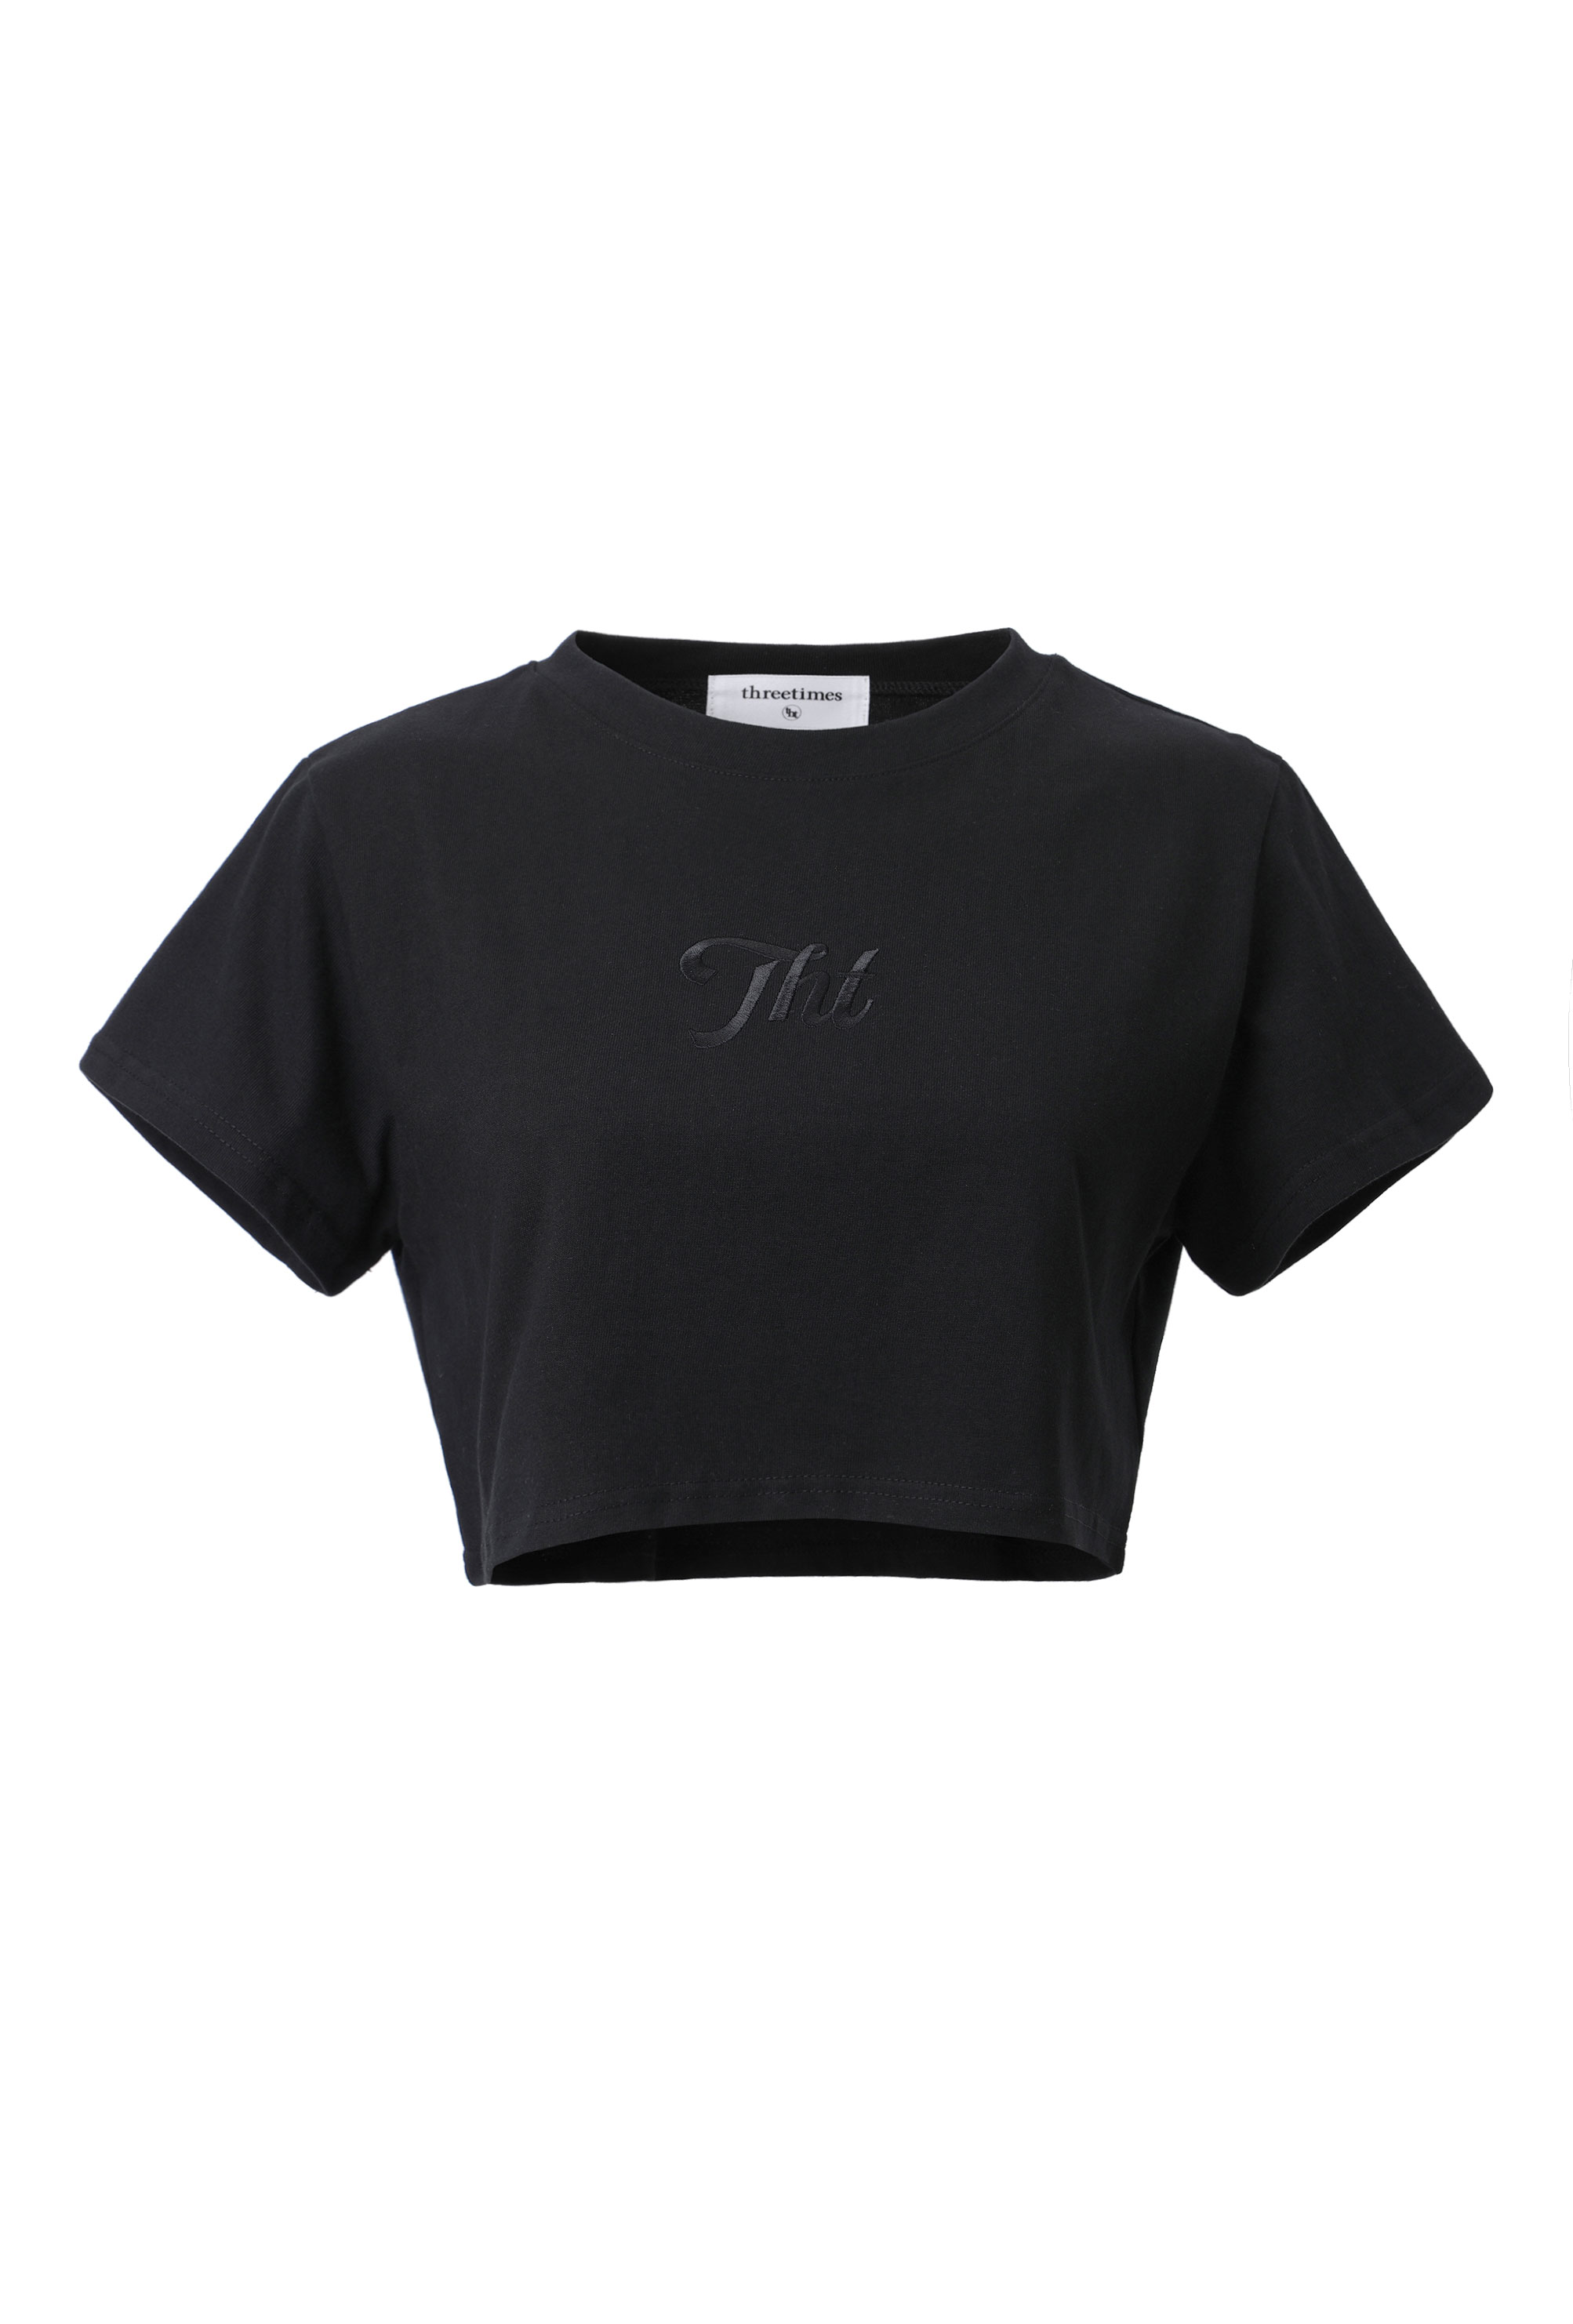 Tht cropped tee